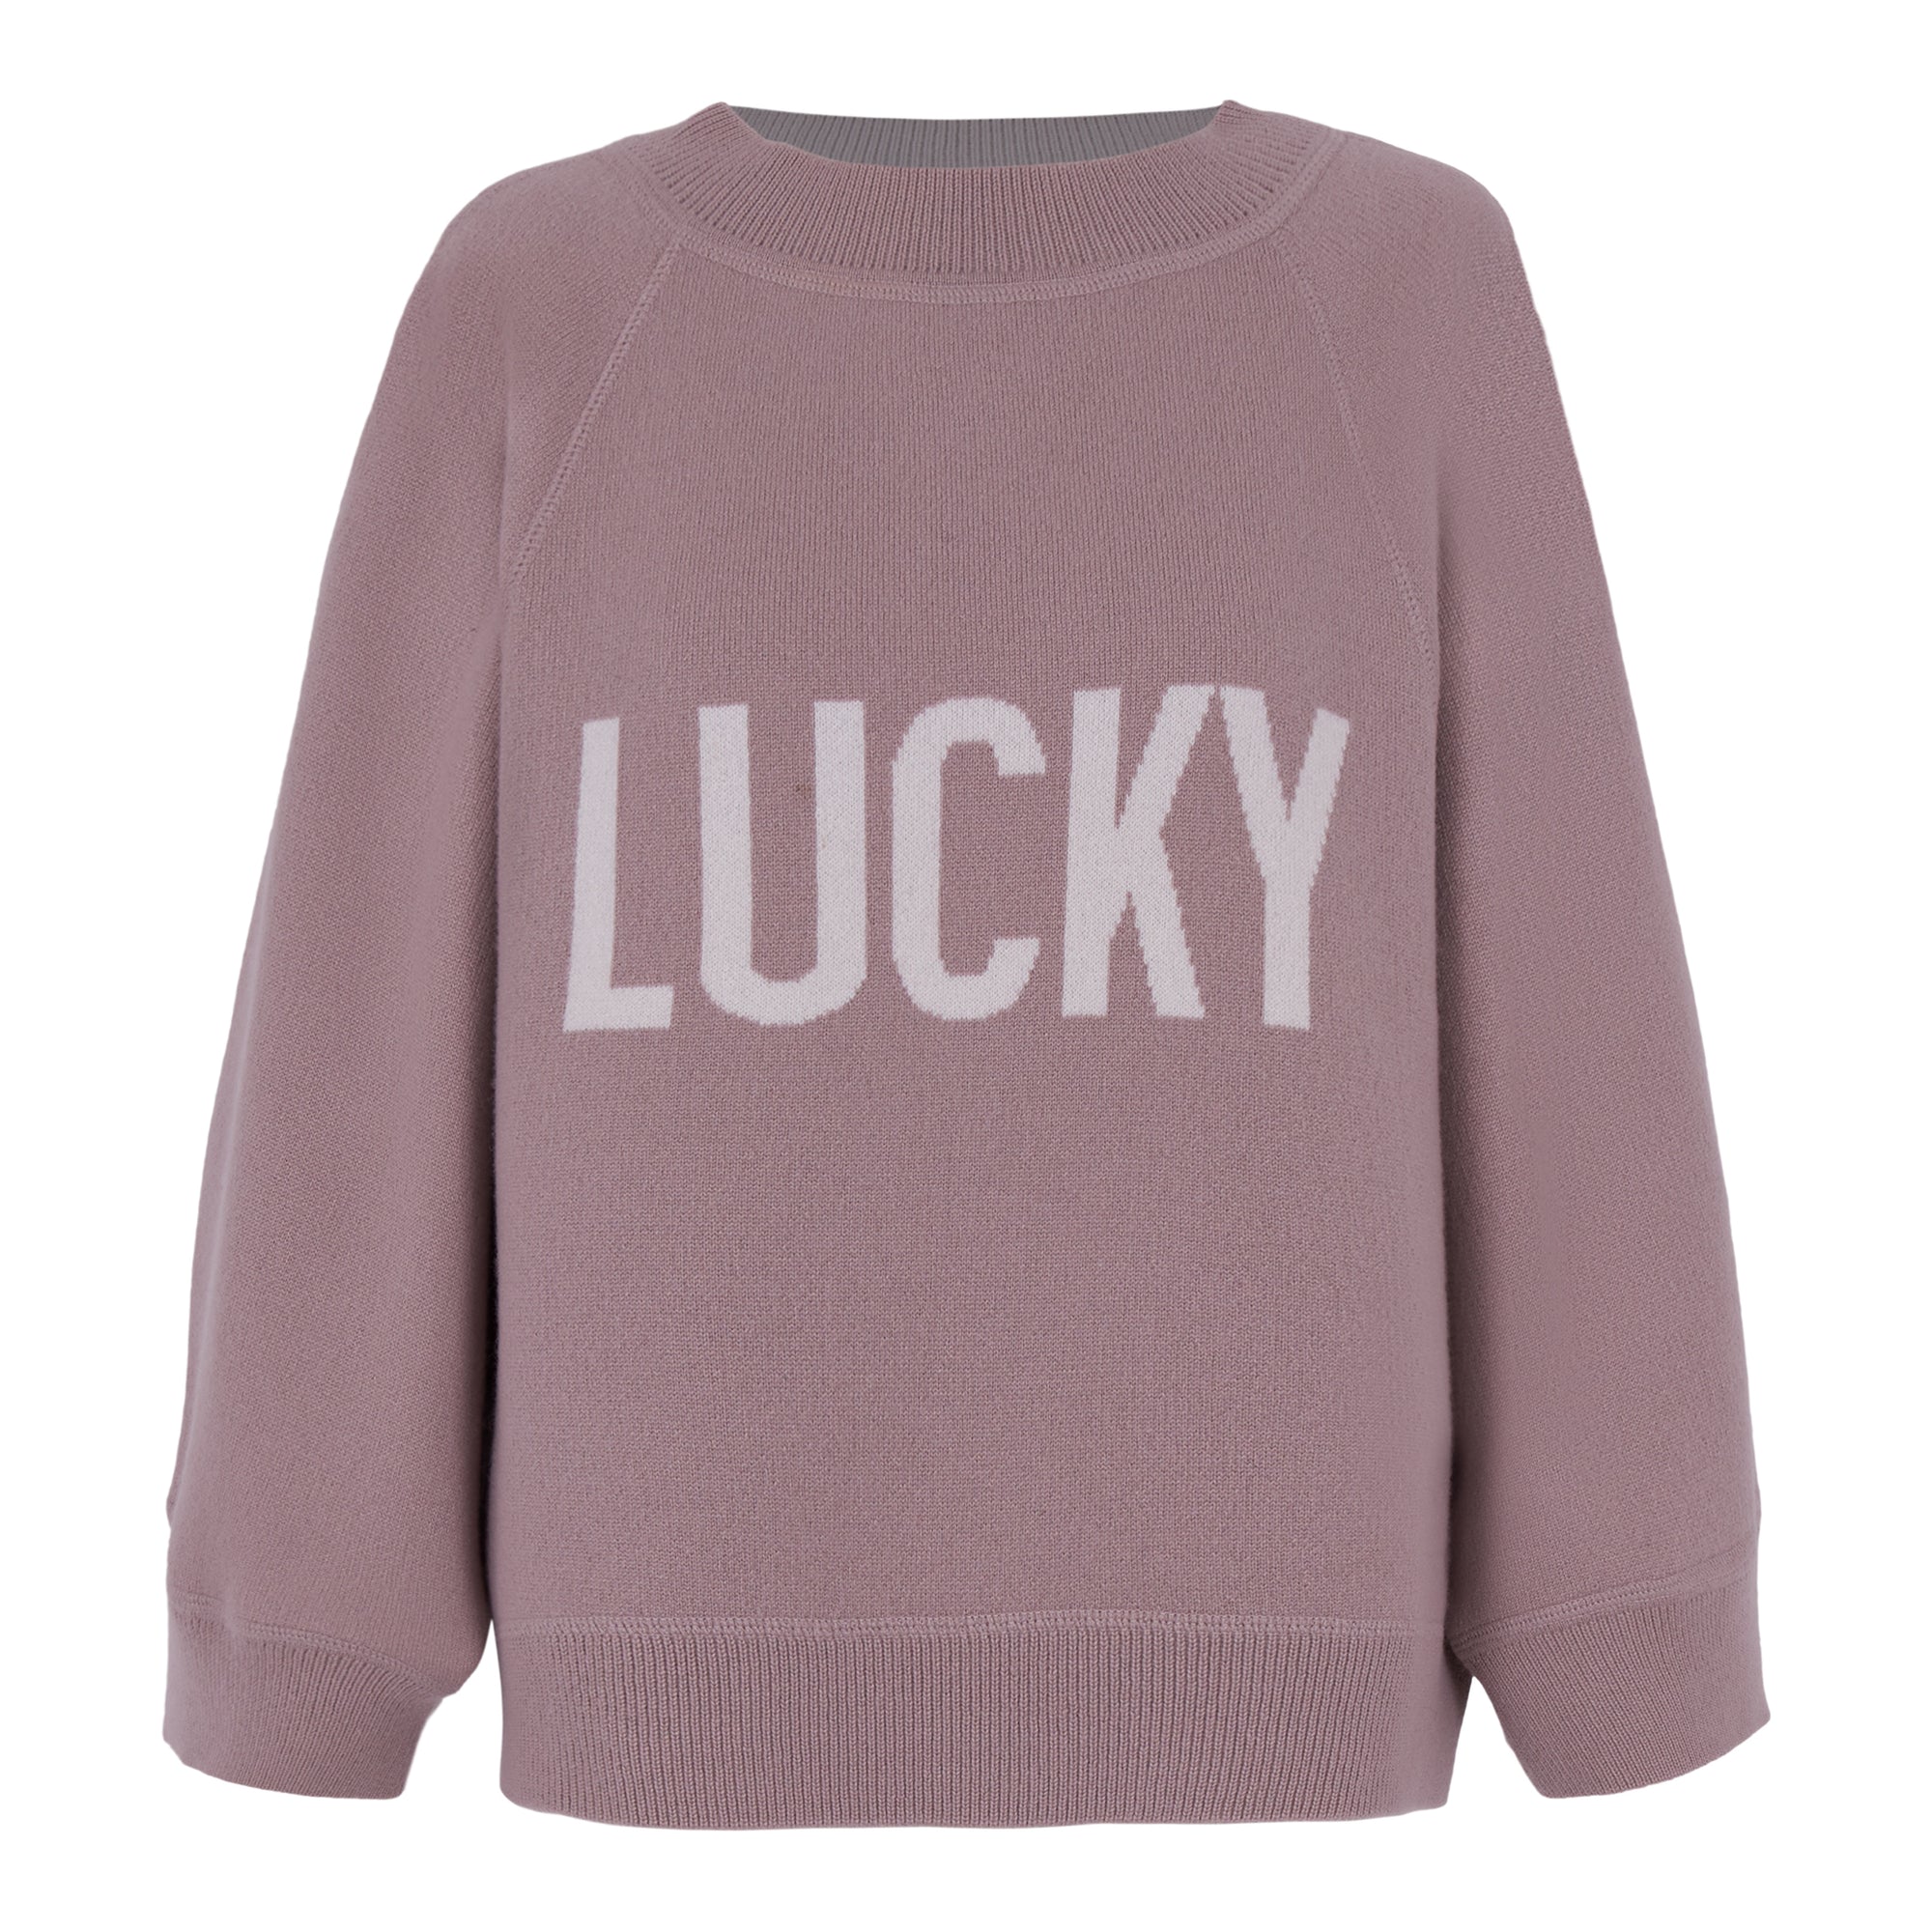 Dior "Lucky" Boxy Sweater